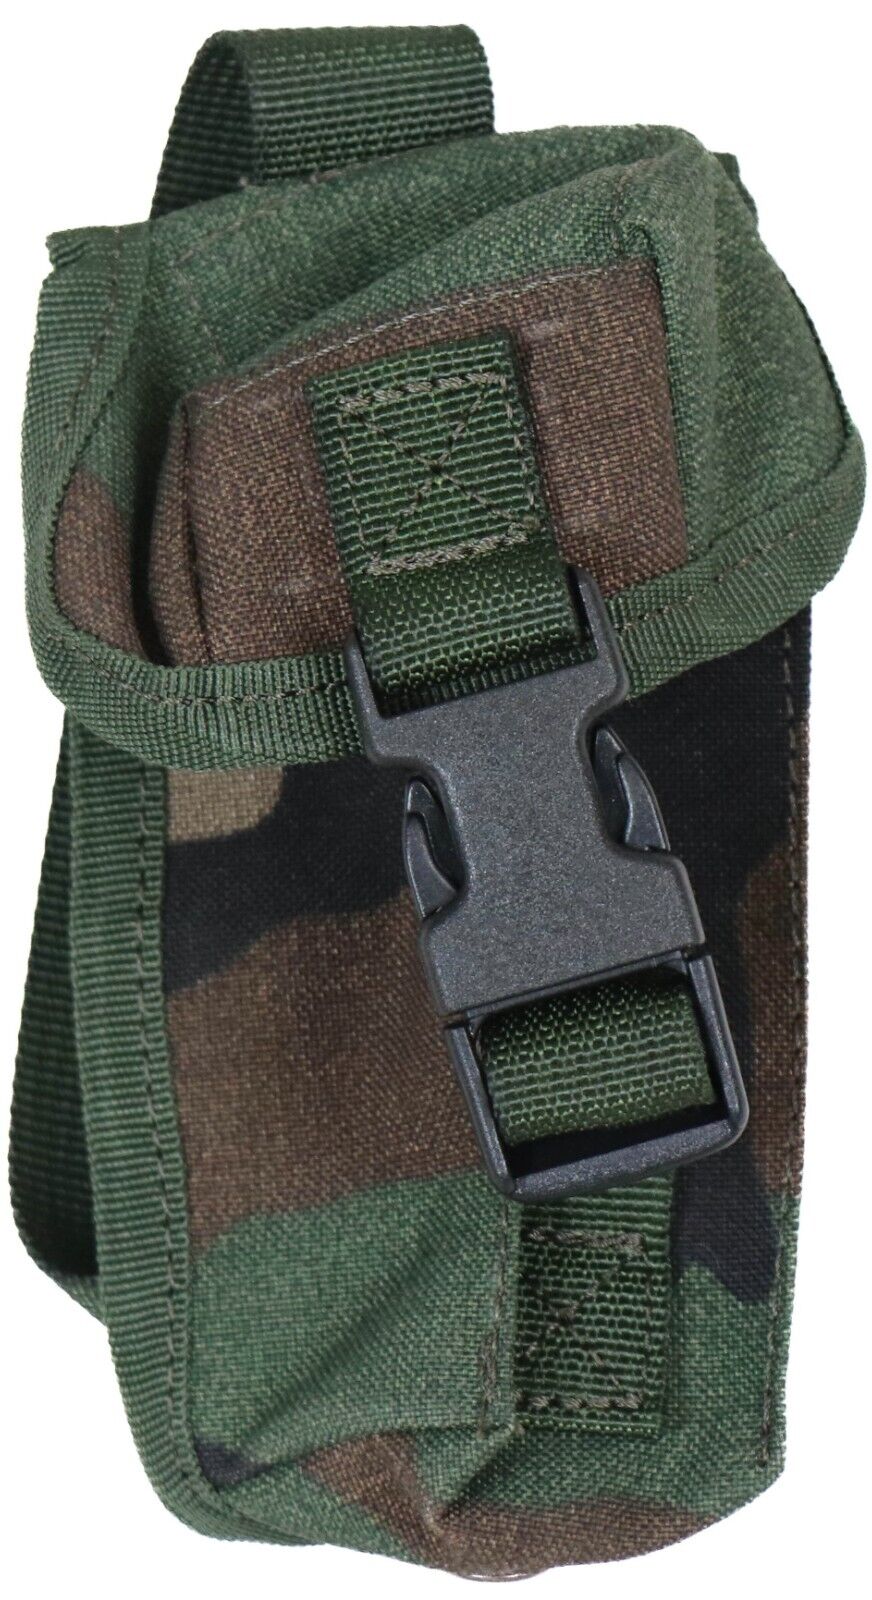 Authentic Dutch Army Ammo Pouch Molle DPM Camo Woodland Netherlands Mag Grenade